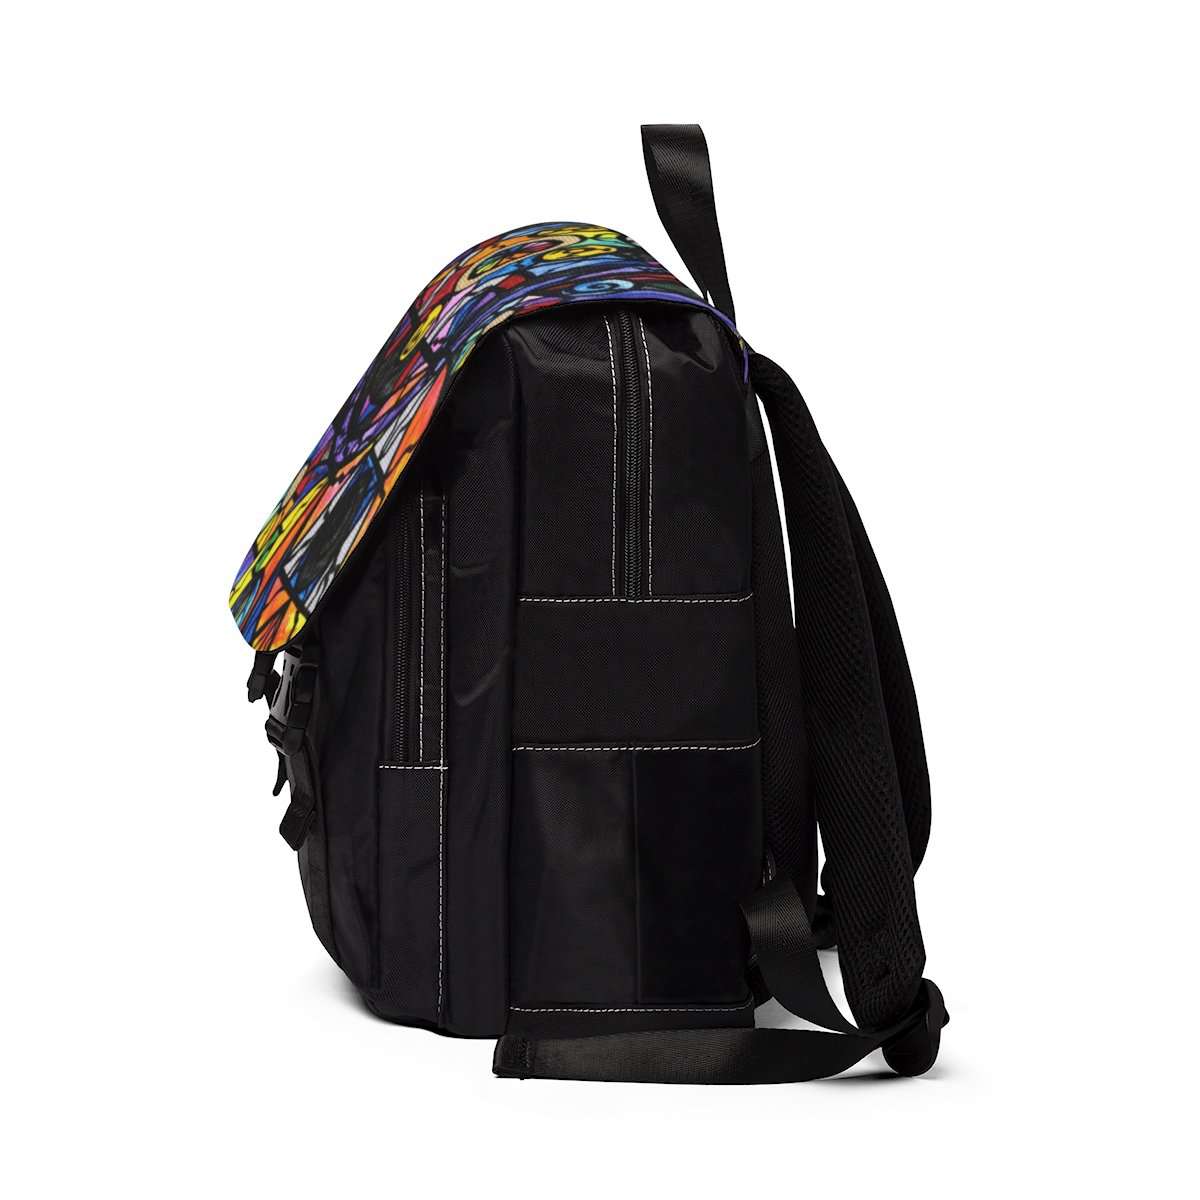 shop-for-the-latest-alchemy-unisex-casual-shoulder-backpack-online-now_2.jpg